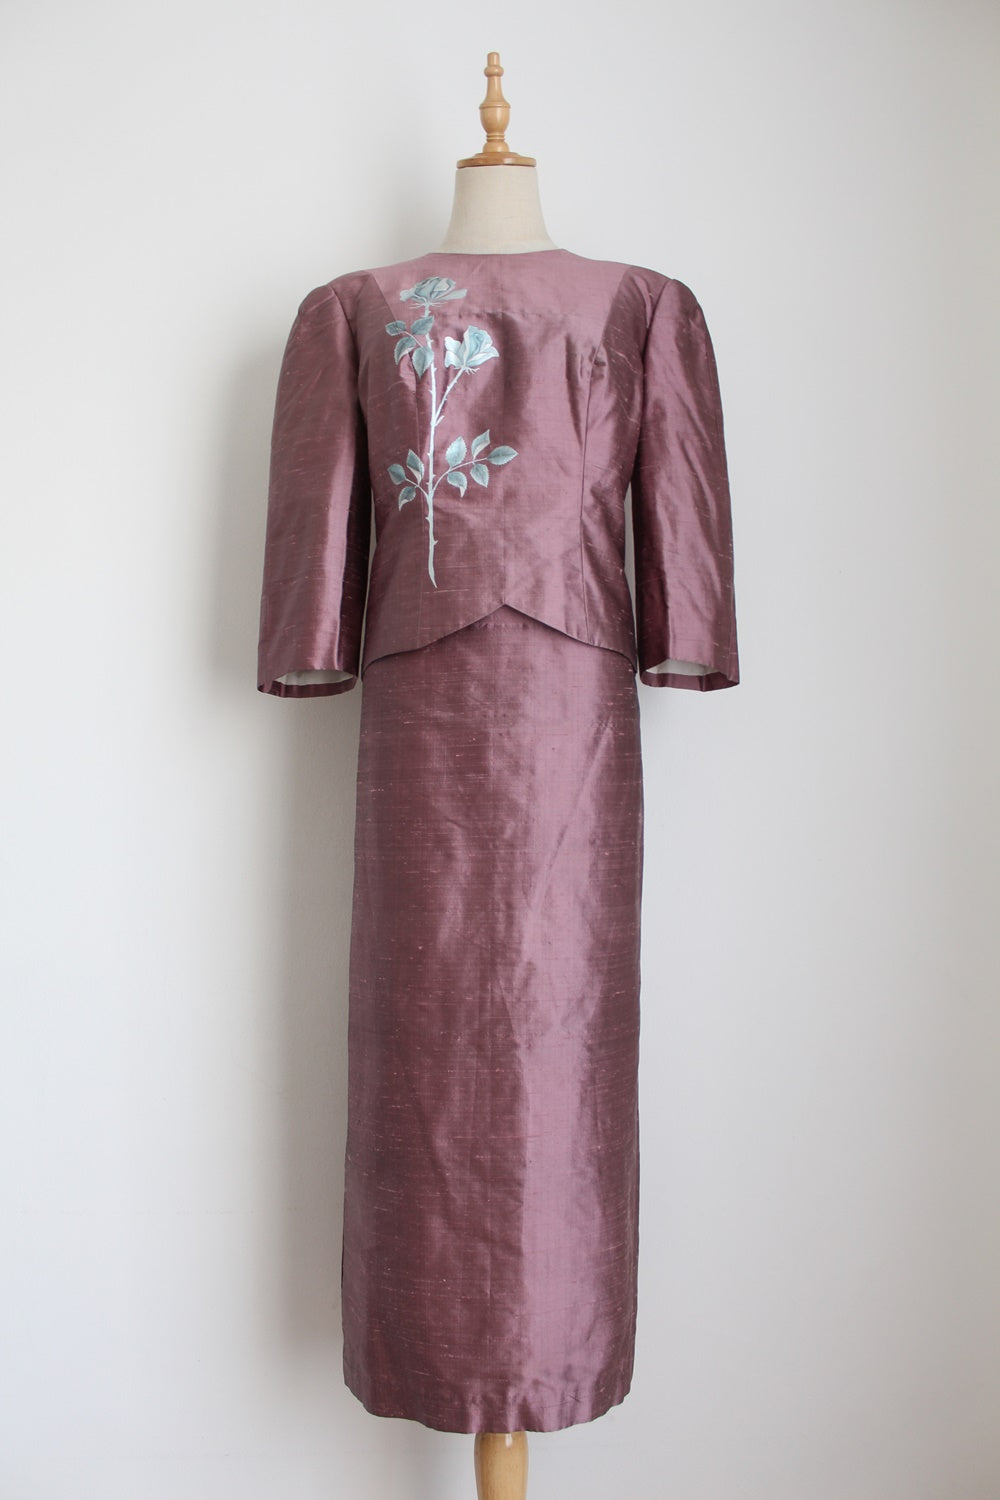 VINTAGE 100% SILK TWO PIECE SKIRT SUIT - SIZE 6